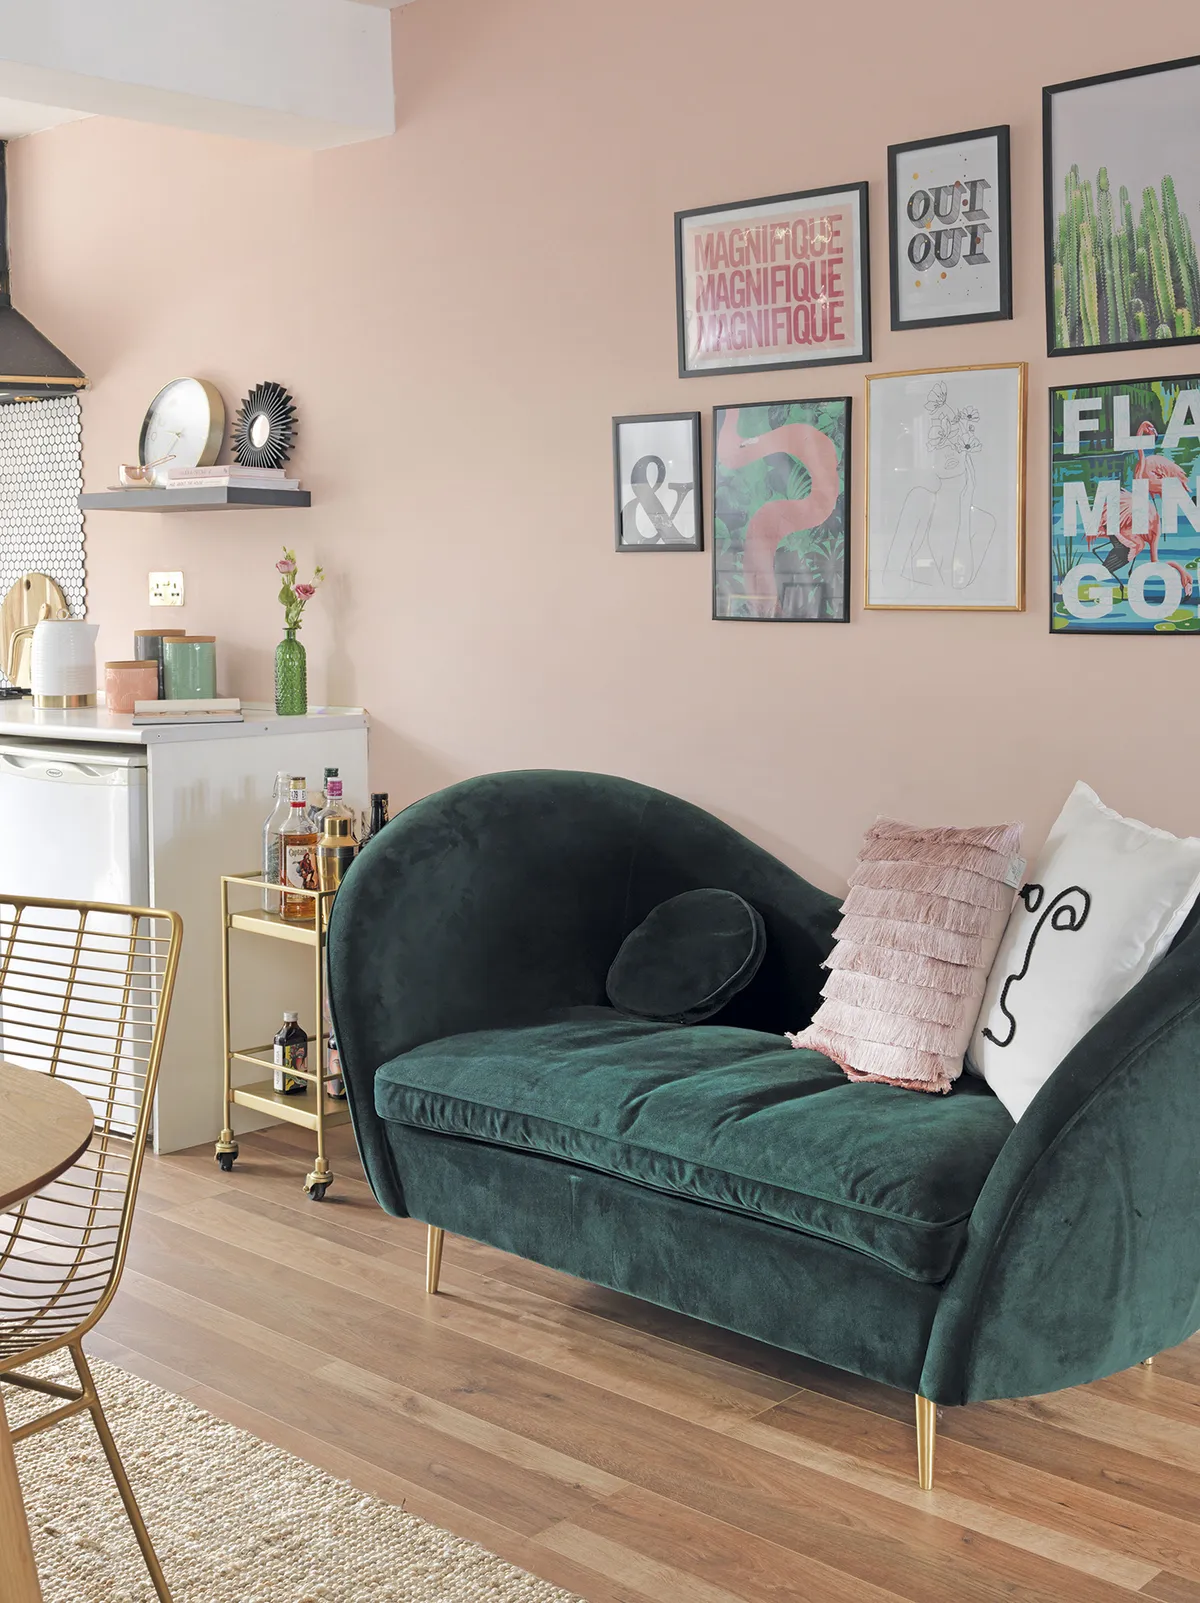 Opposite the dining table, a compact velvet sofa from MADE.com sits underneath a selection of fun framed prints and quotes. ‘I’ve gone for a dark green and blush pink scheme with gold and brass accents,’ says Raya. ‘The drinks trolley next to the sofa gets pulled out when friends are round, but it’s small enough not to get in the way’